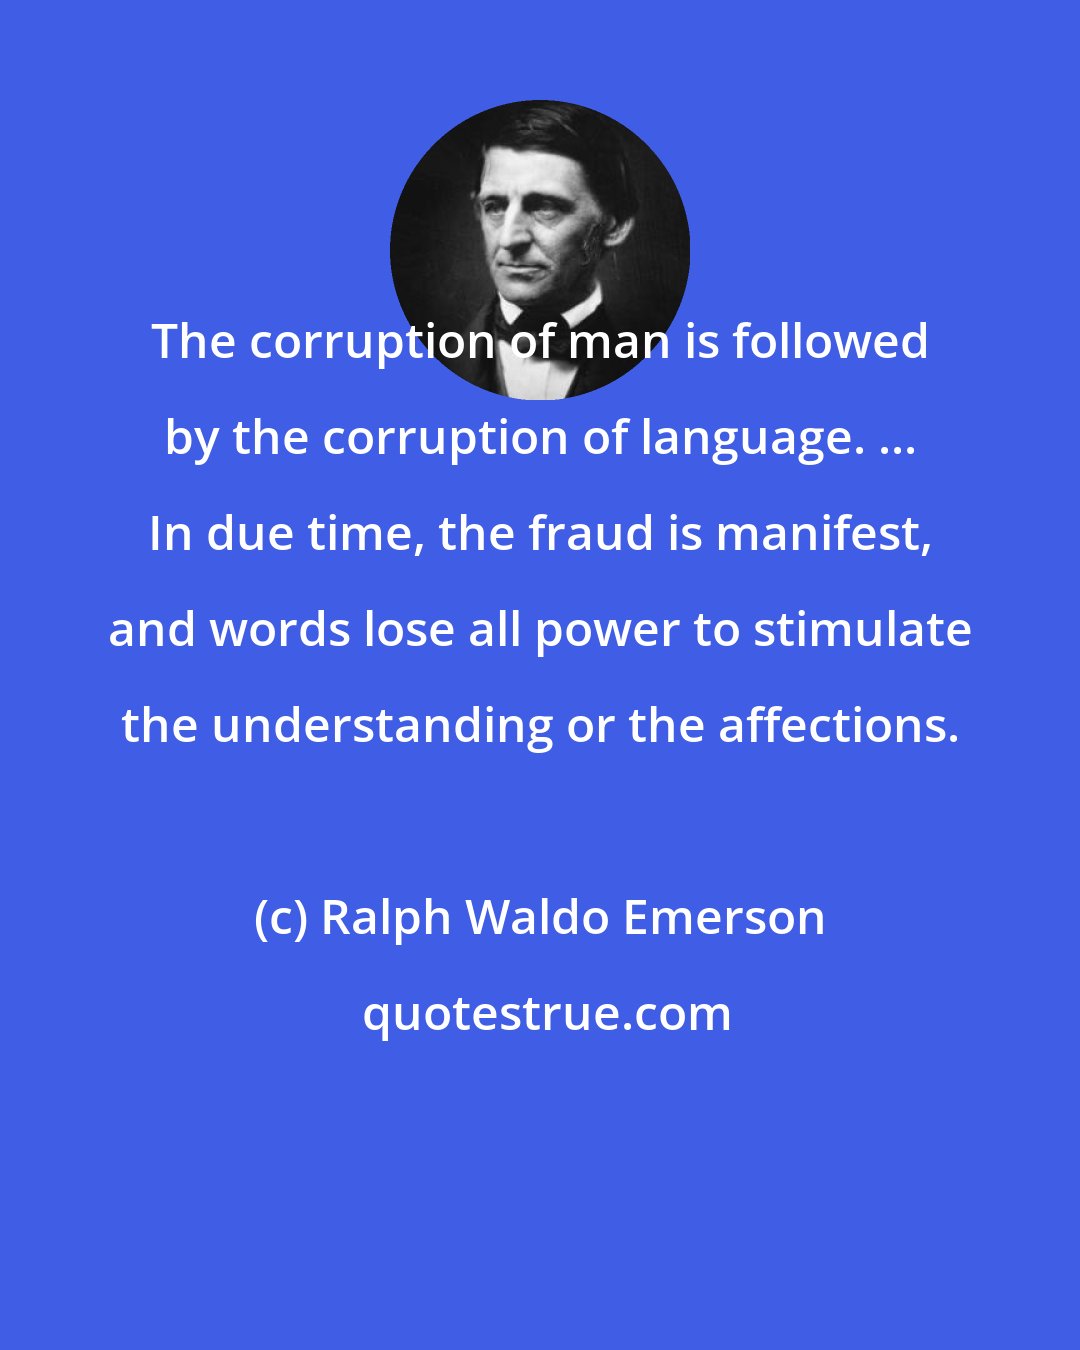 Ralph Waldo Emerson: The corruption of man is followed by the corruption of language. ... In due time, the fraud is manifest, and words lose all power to stimulate the understanding or the affections.